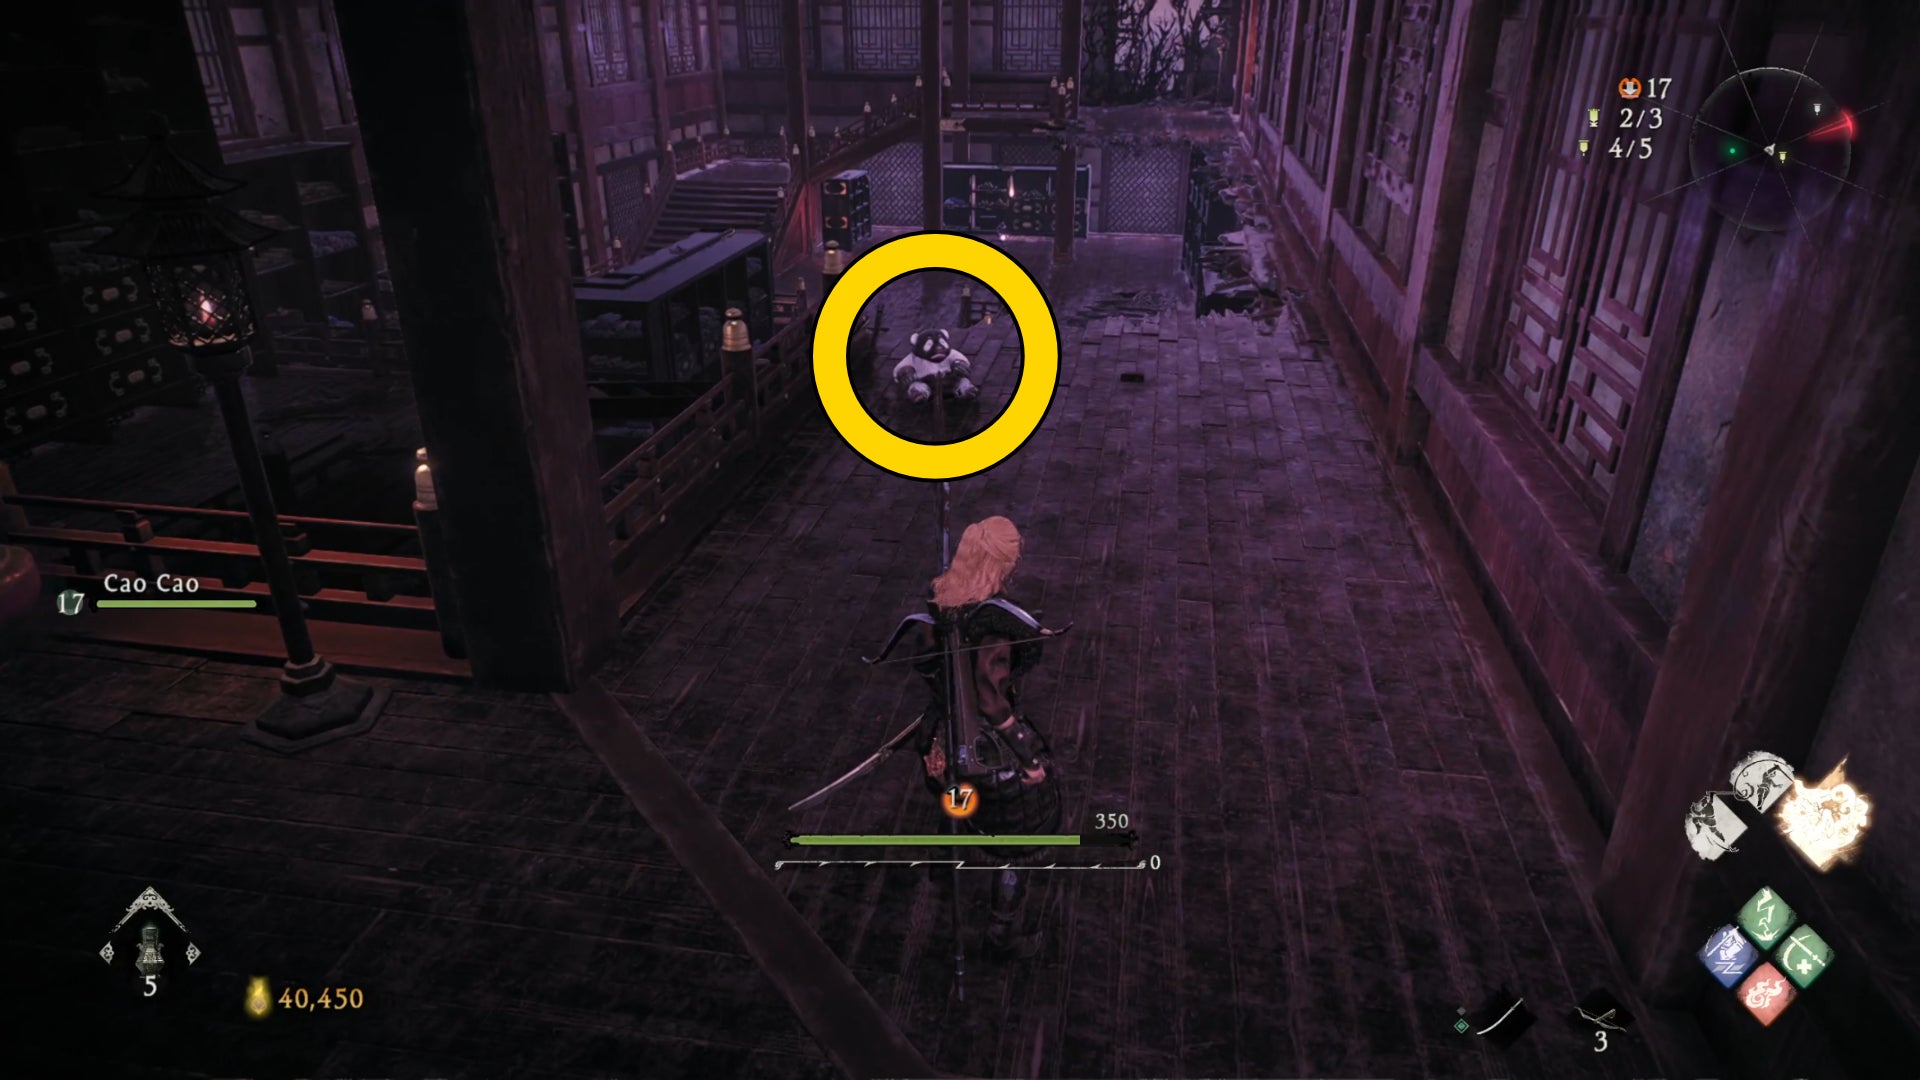 The player approaches a Shitieshou on the upper floor of a darkened room in Wo Long.